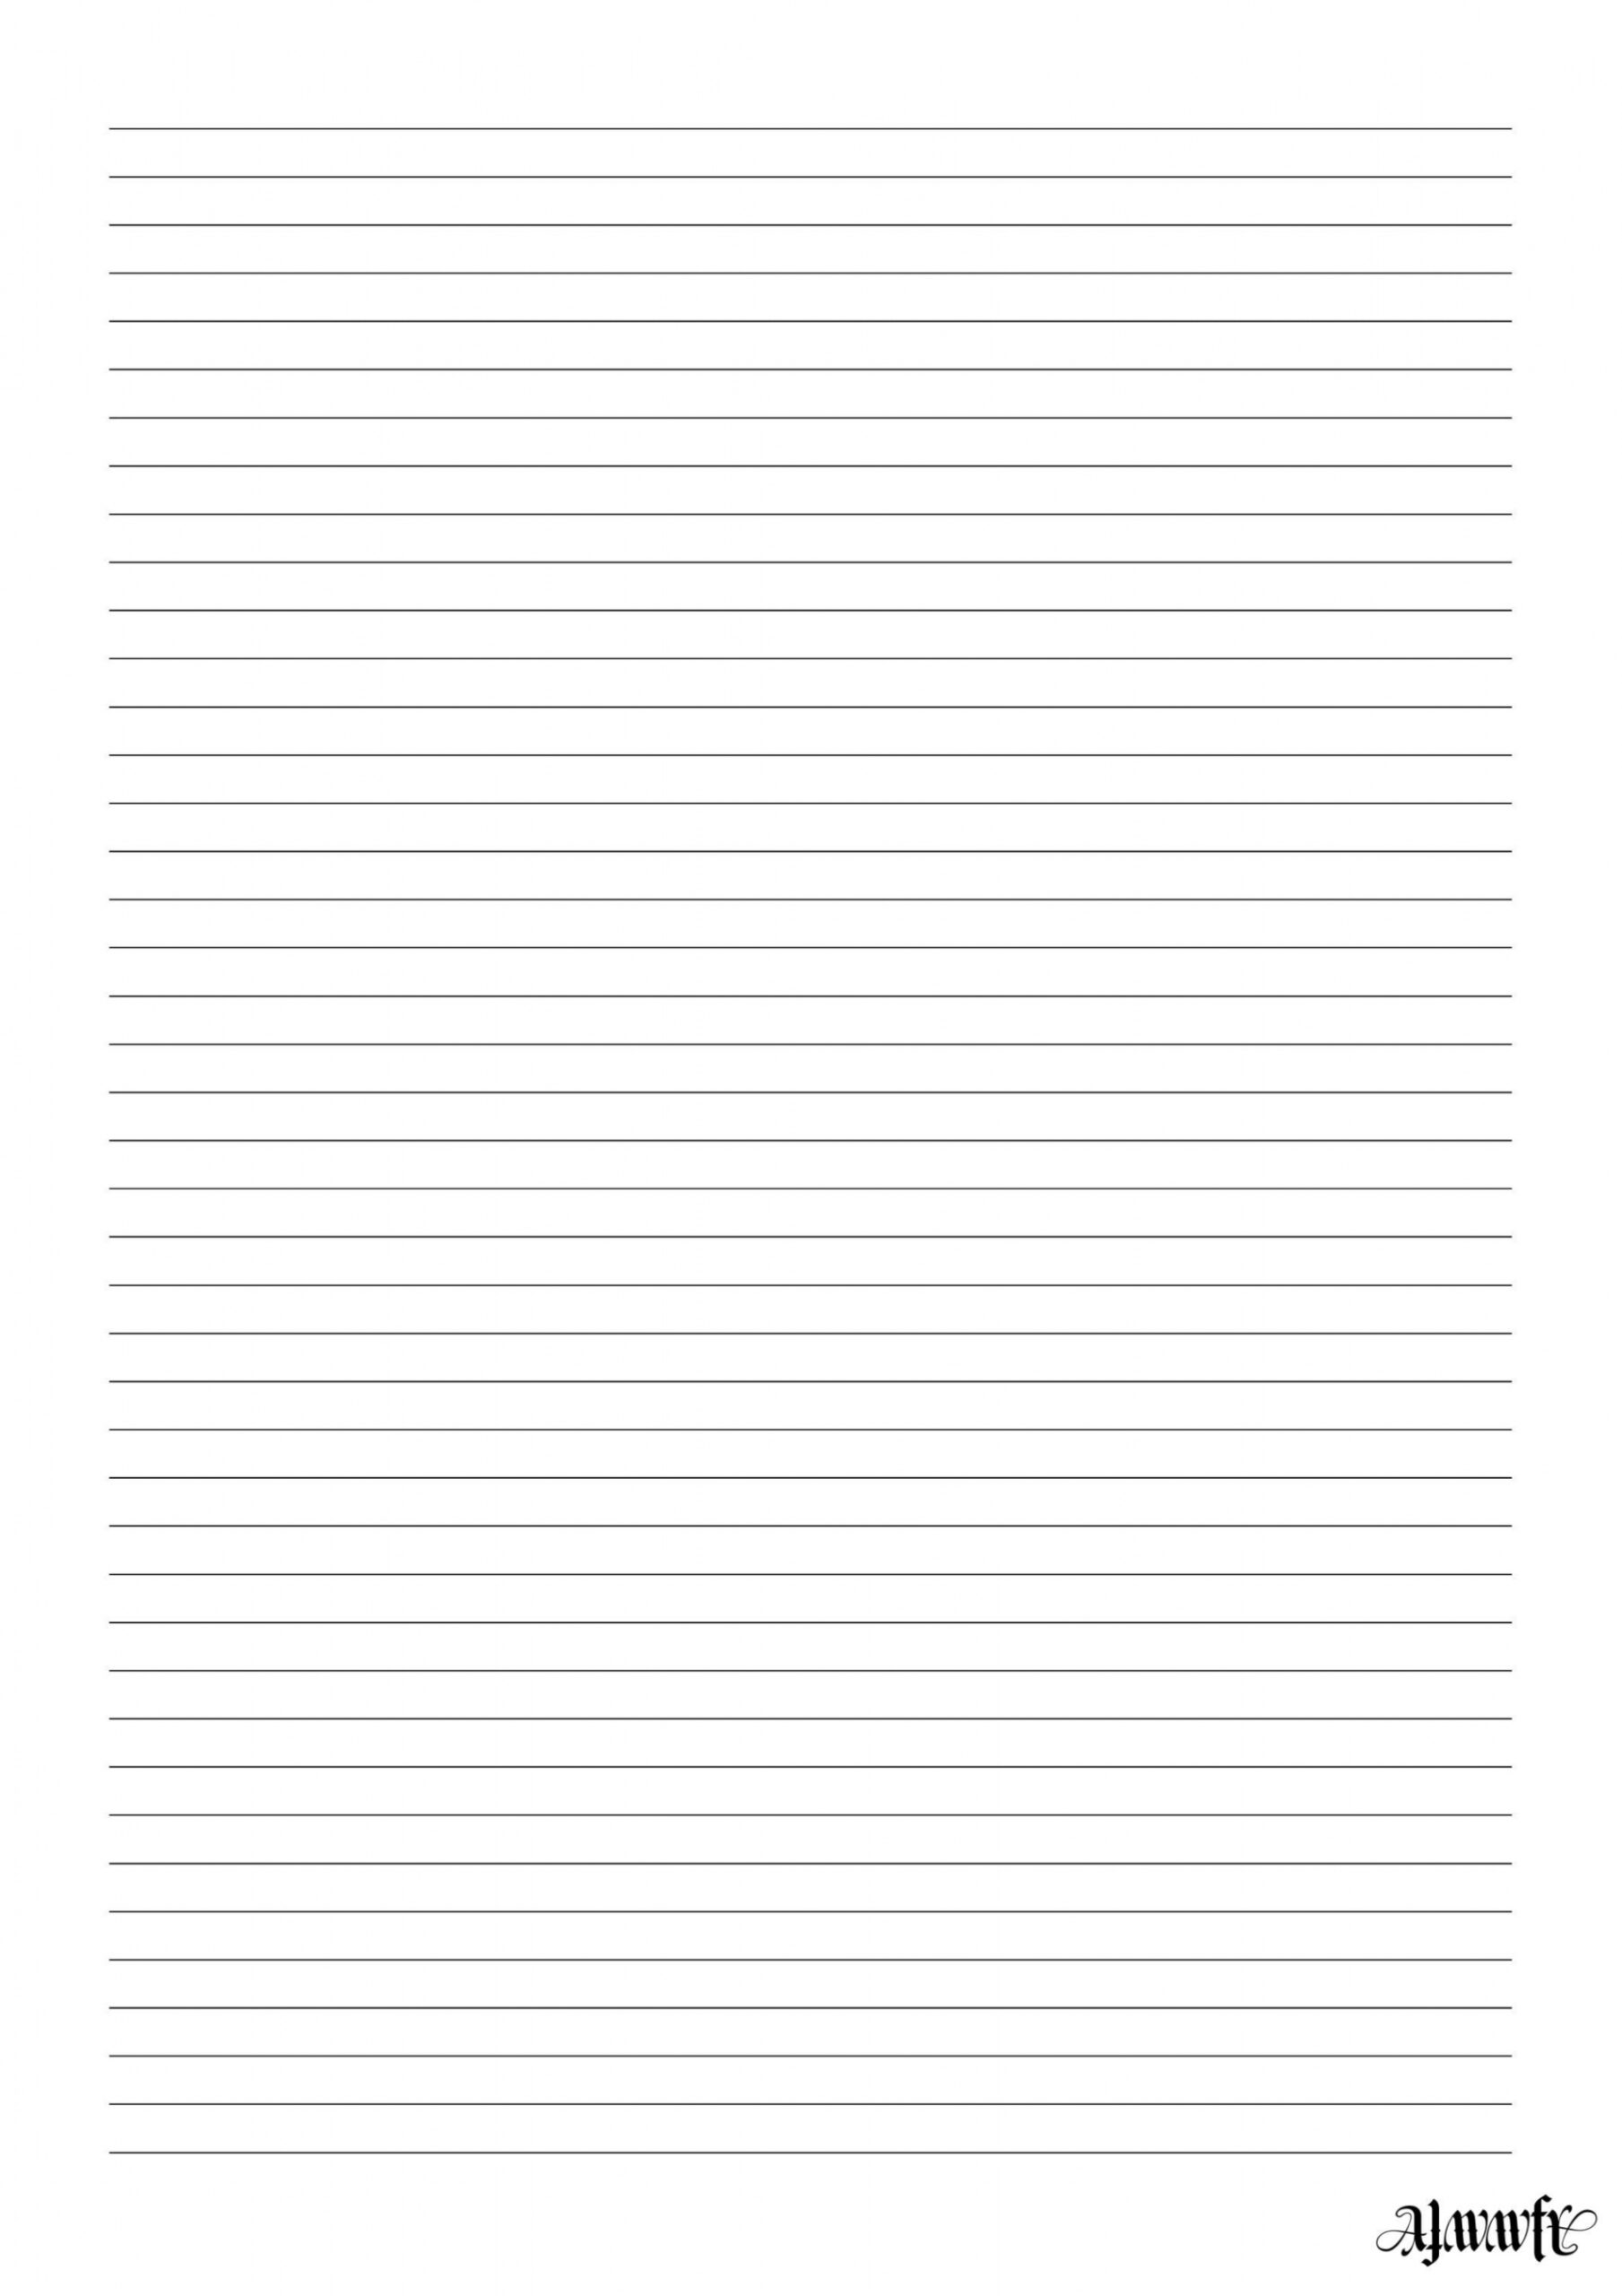 Lined Printable A paper, letter writing, personal use only - Blank Writing Paper